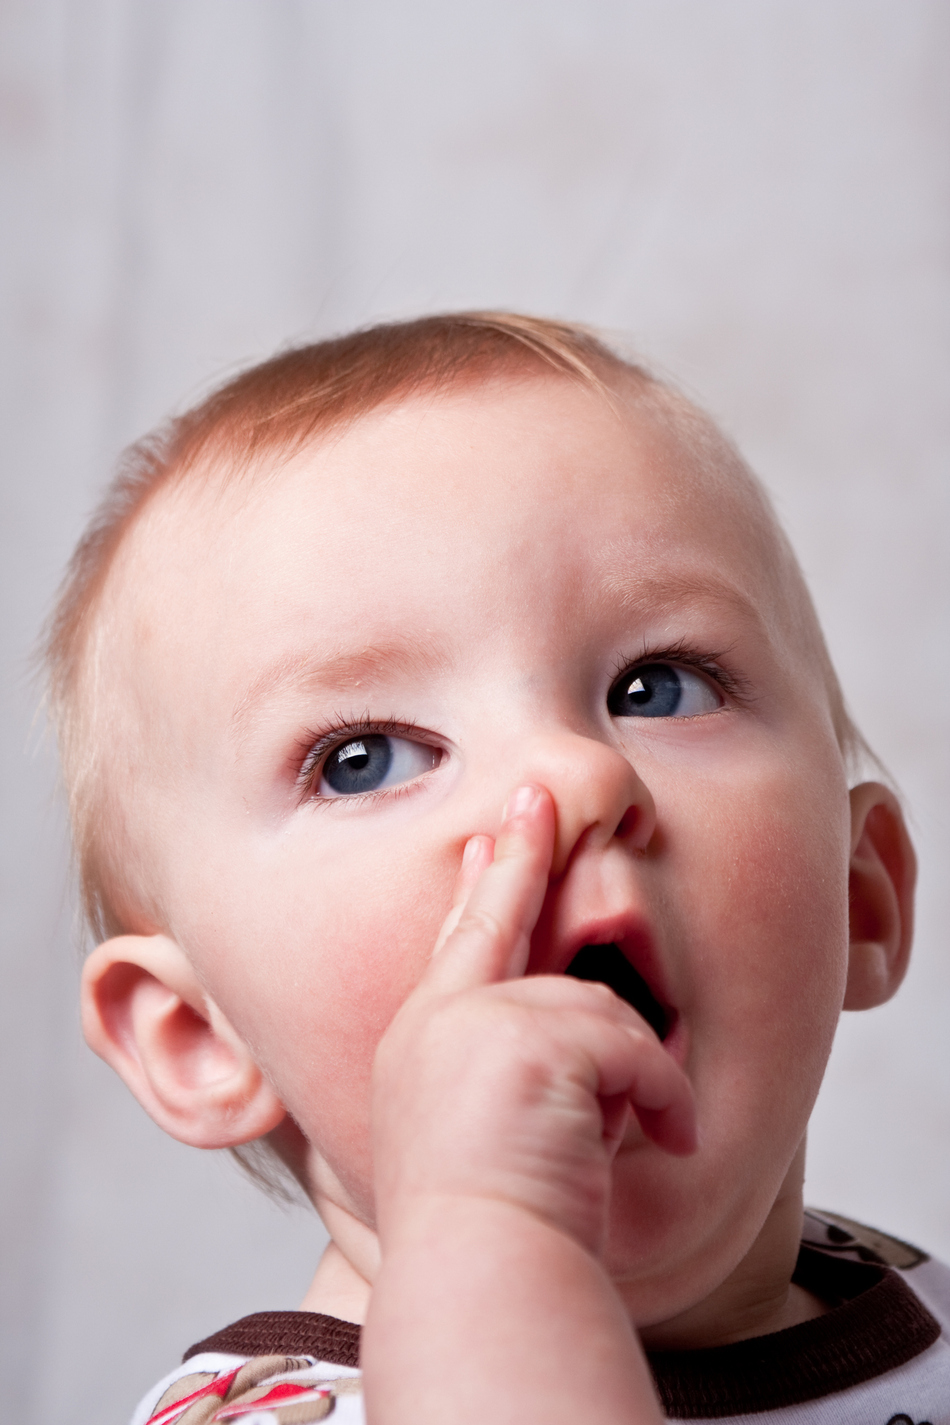 Health Hack: Removing a Foreign Object Stuck in Child's Nose